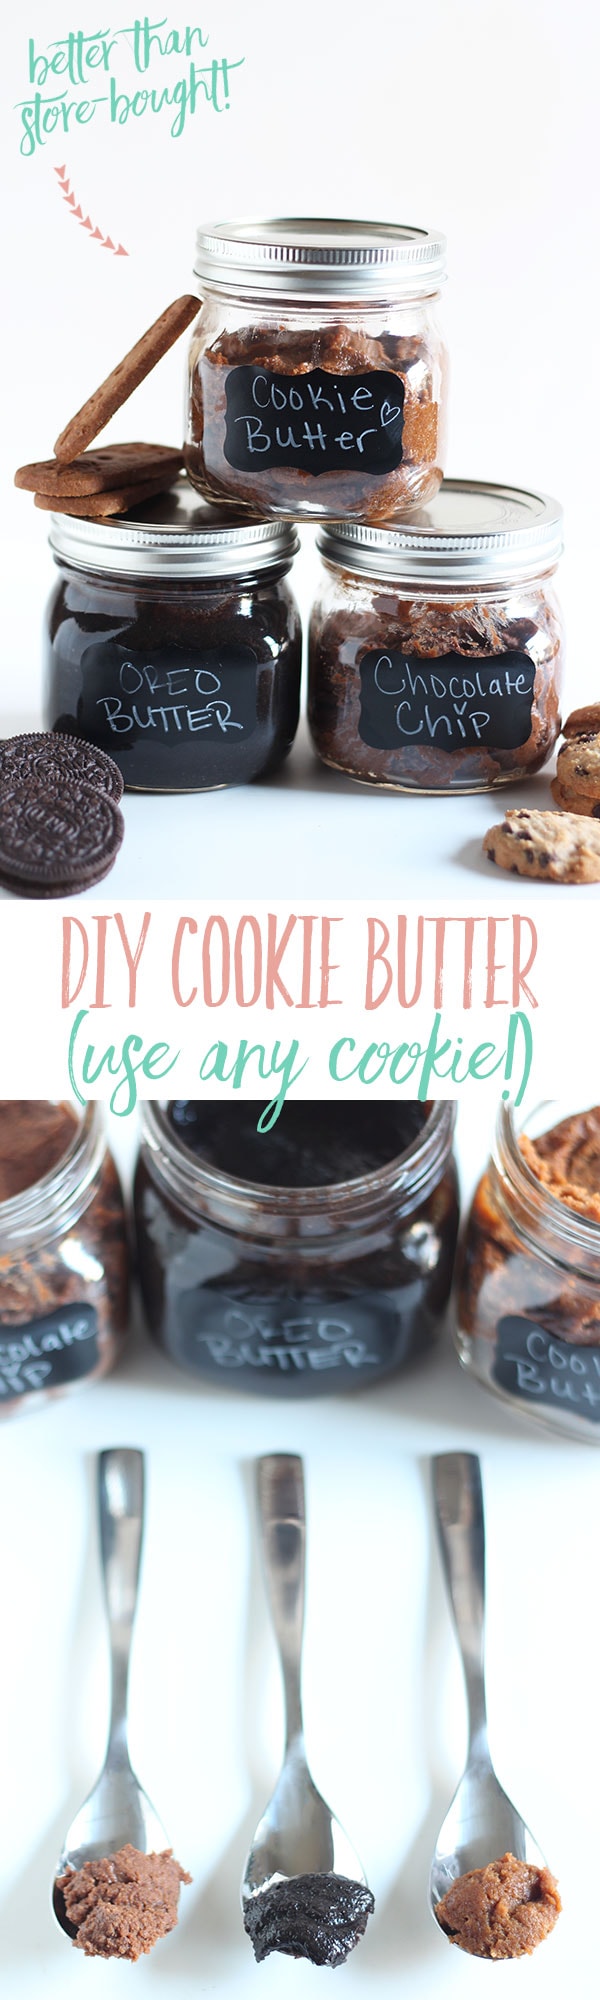 Make DIY Cookie Butter in 10 min using ANY cookie! Even better than store-bought!